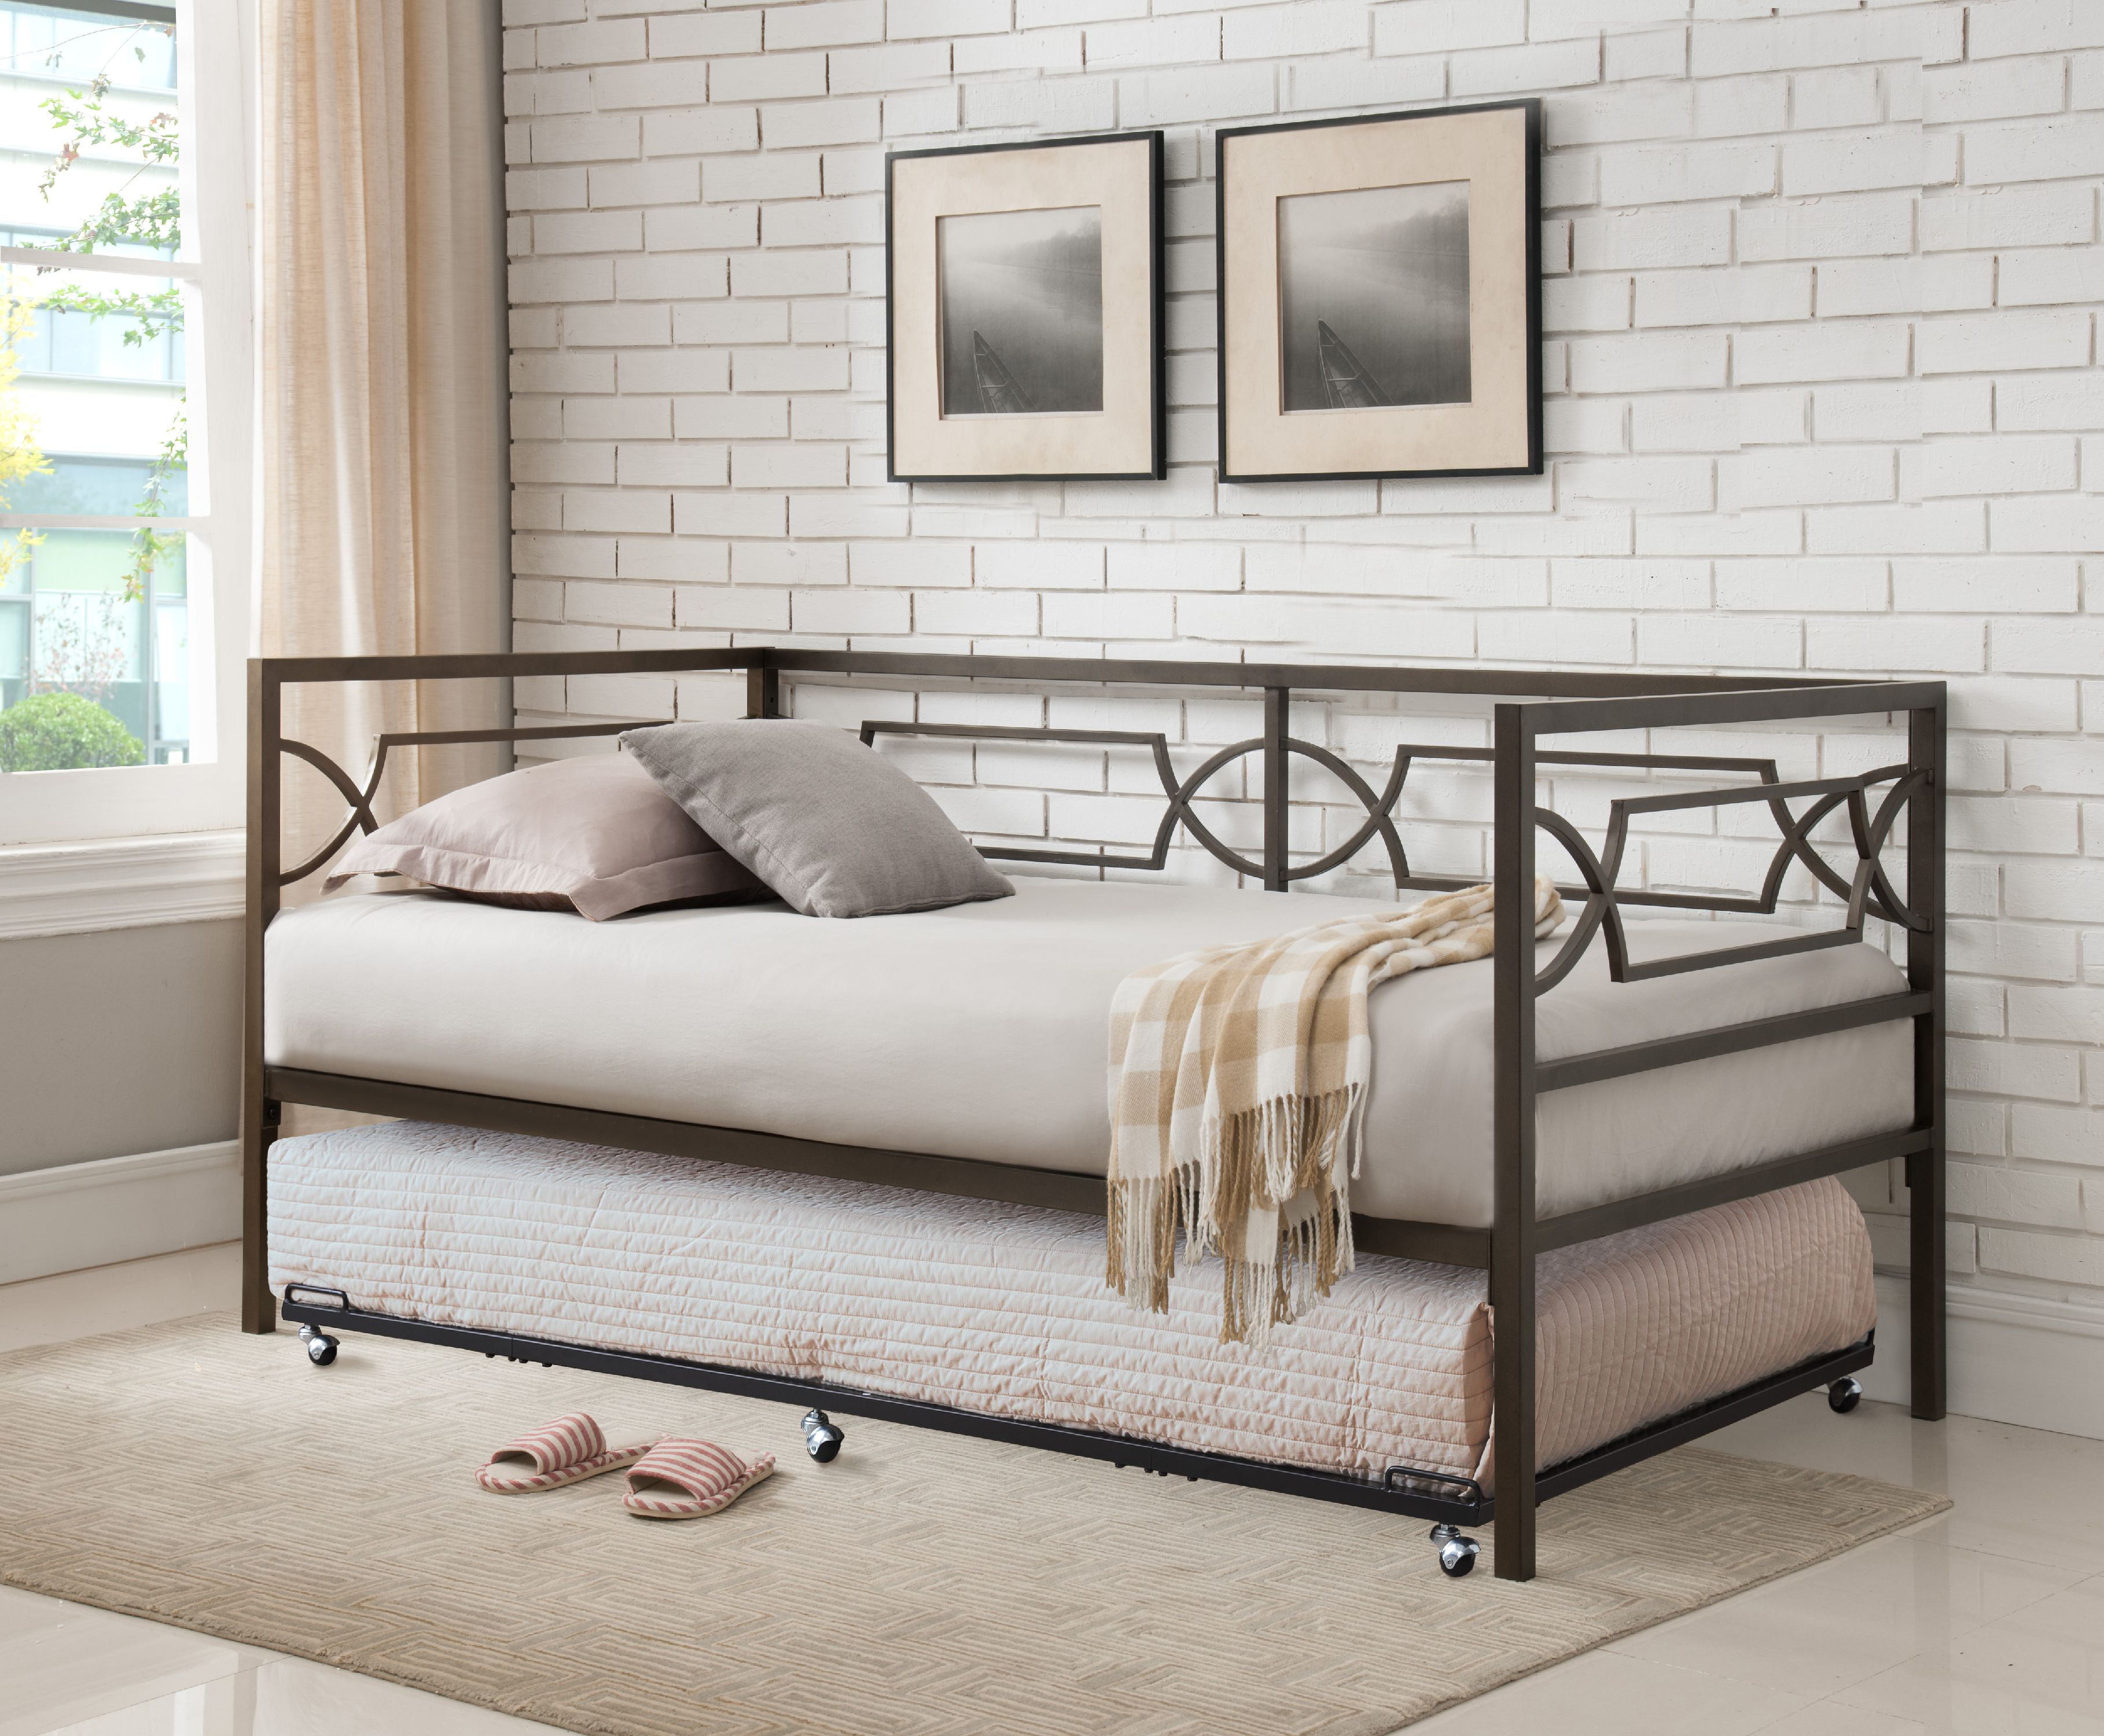 twin bed frames and mattresses